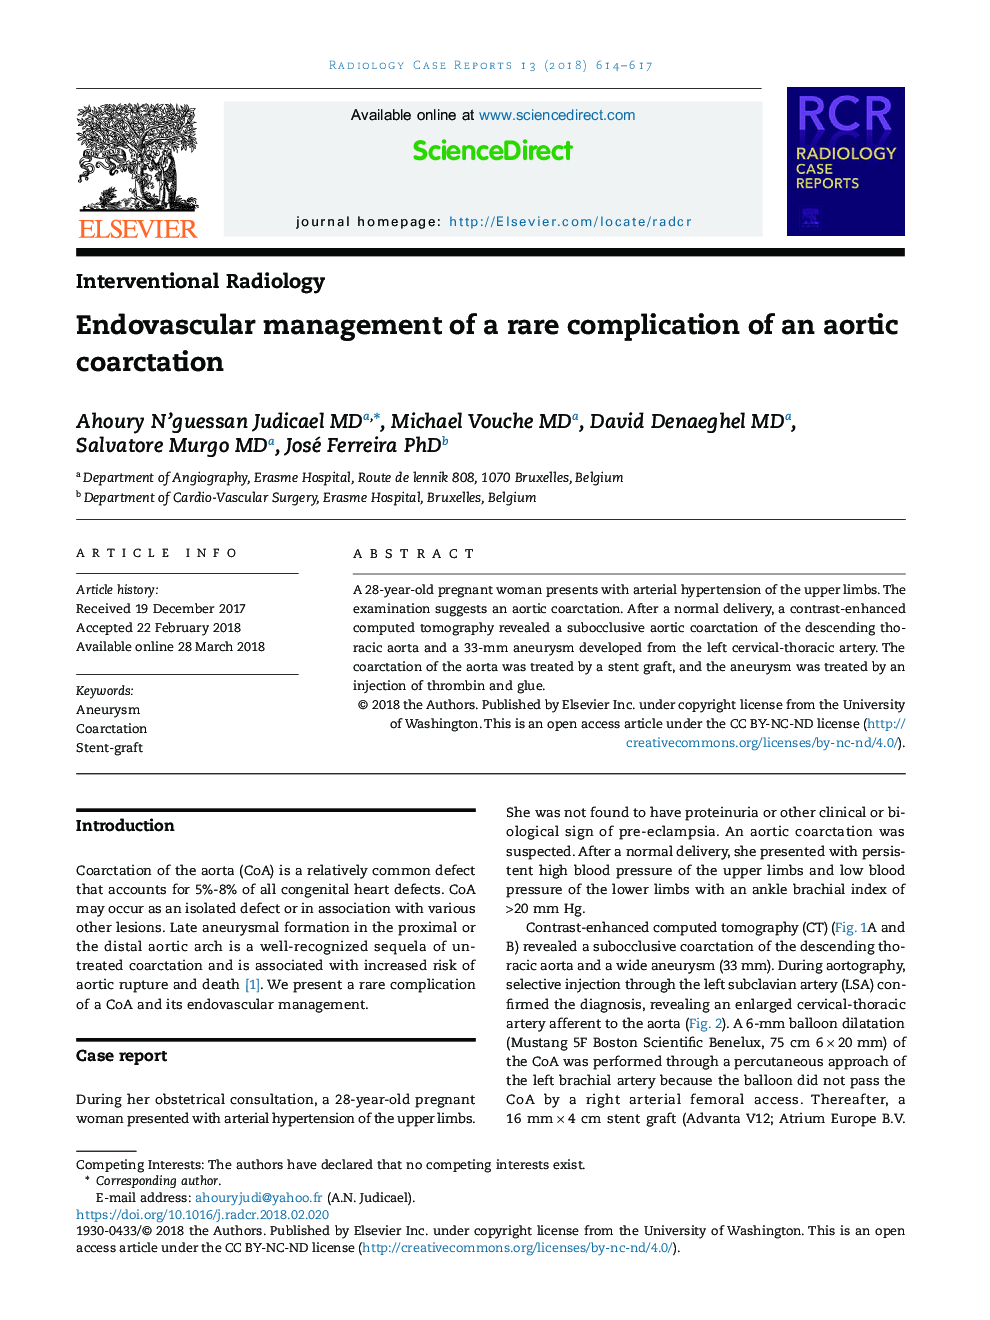 Endovascular management of a rare complication of an aortic coarctation